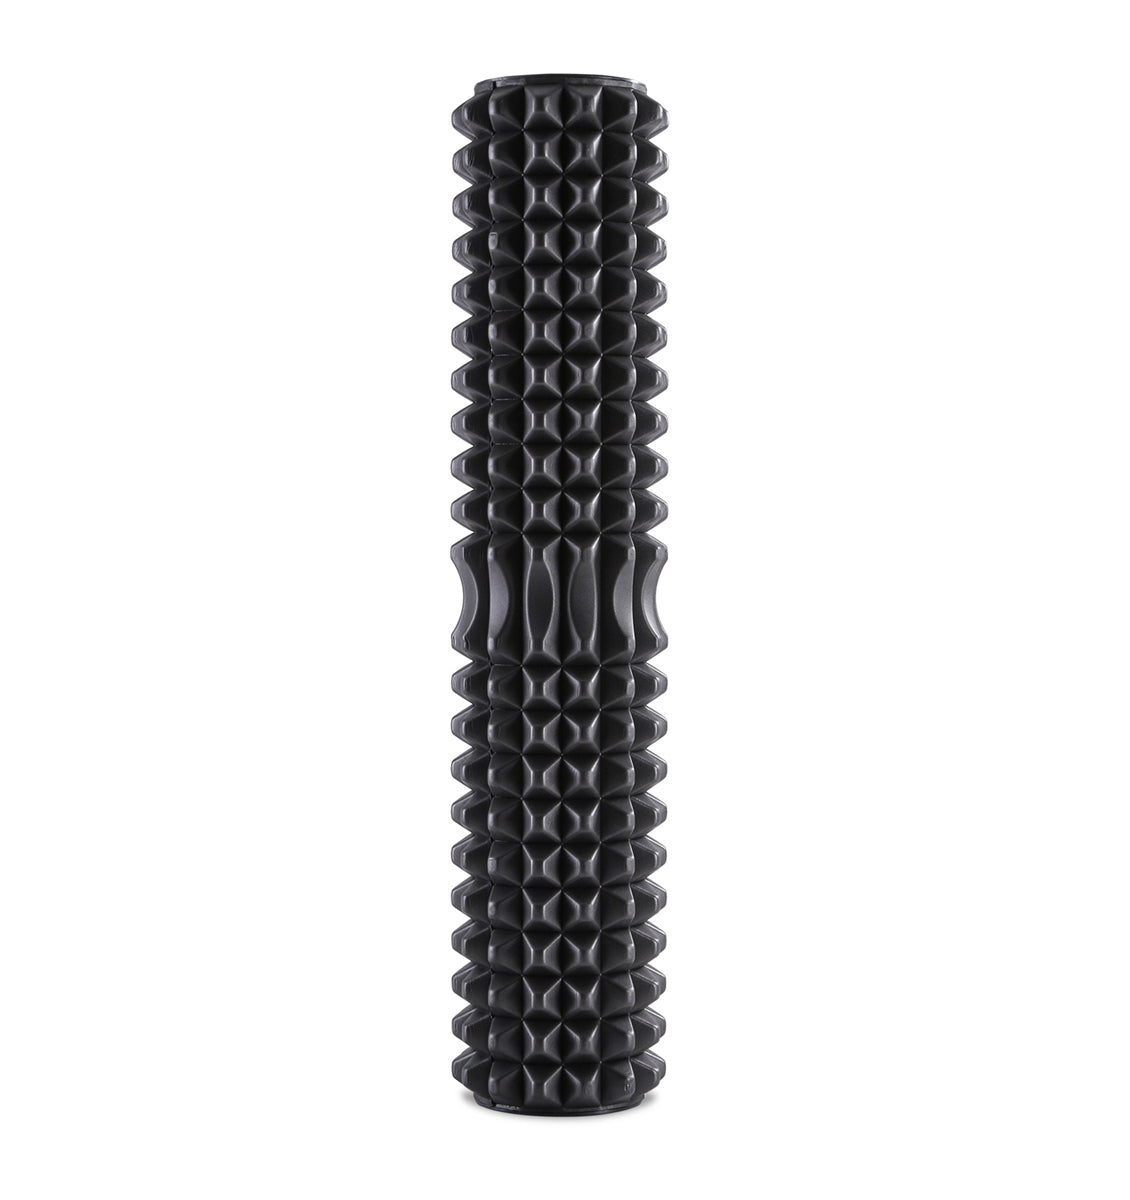 PTP Massage Therapy Foam Roller - Large/Firm - 2